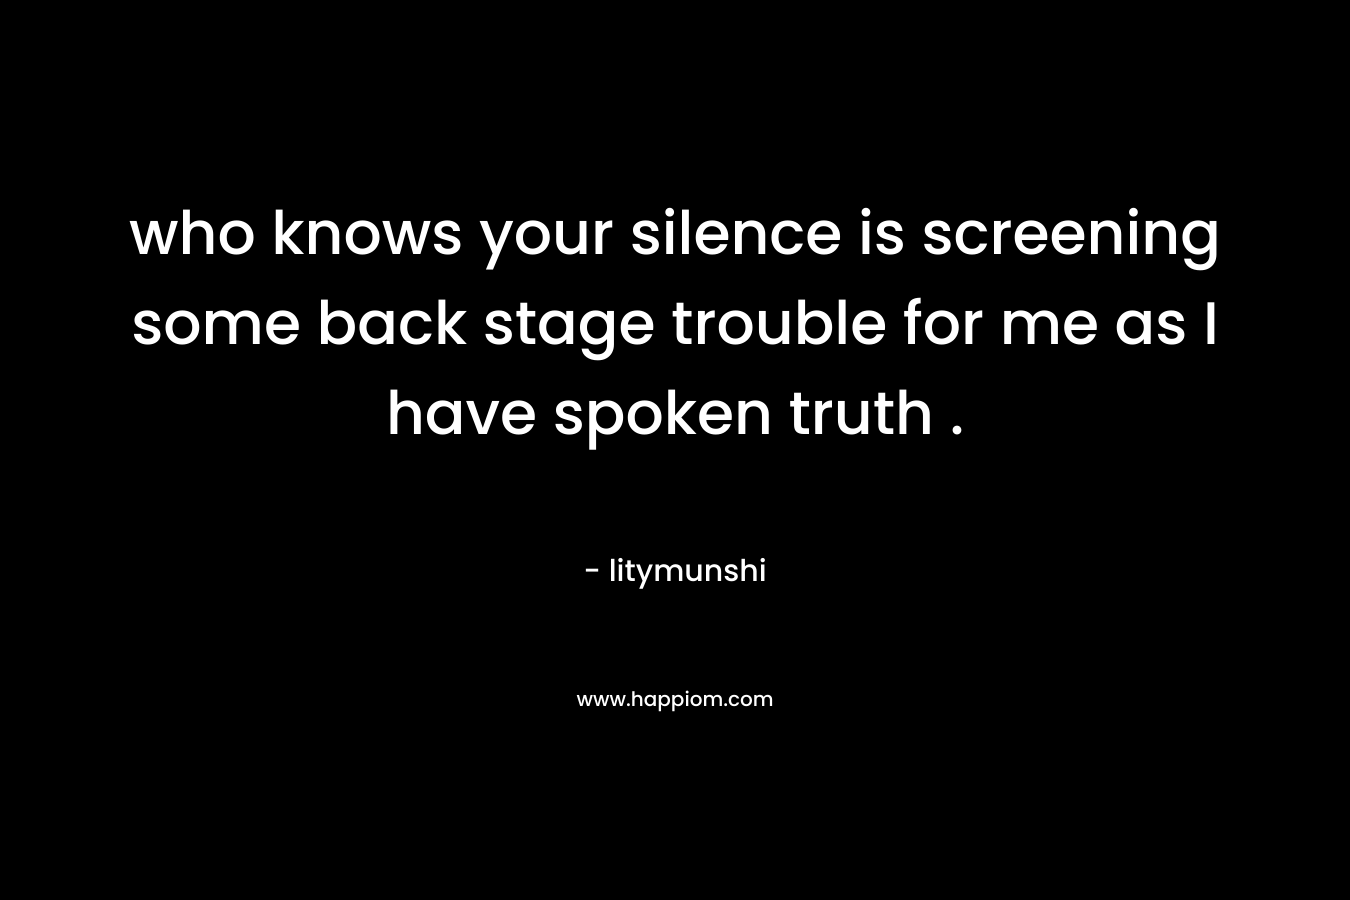 who knows your silence is screening some back stage trouble for me as I have spoken truth .